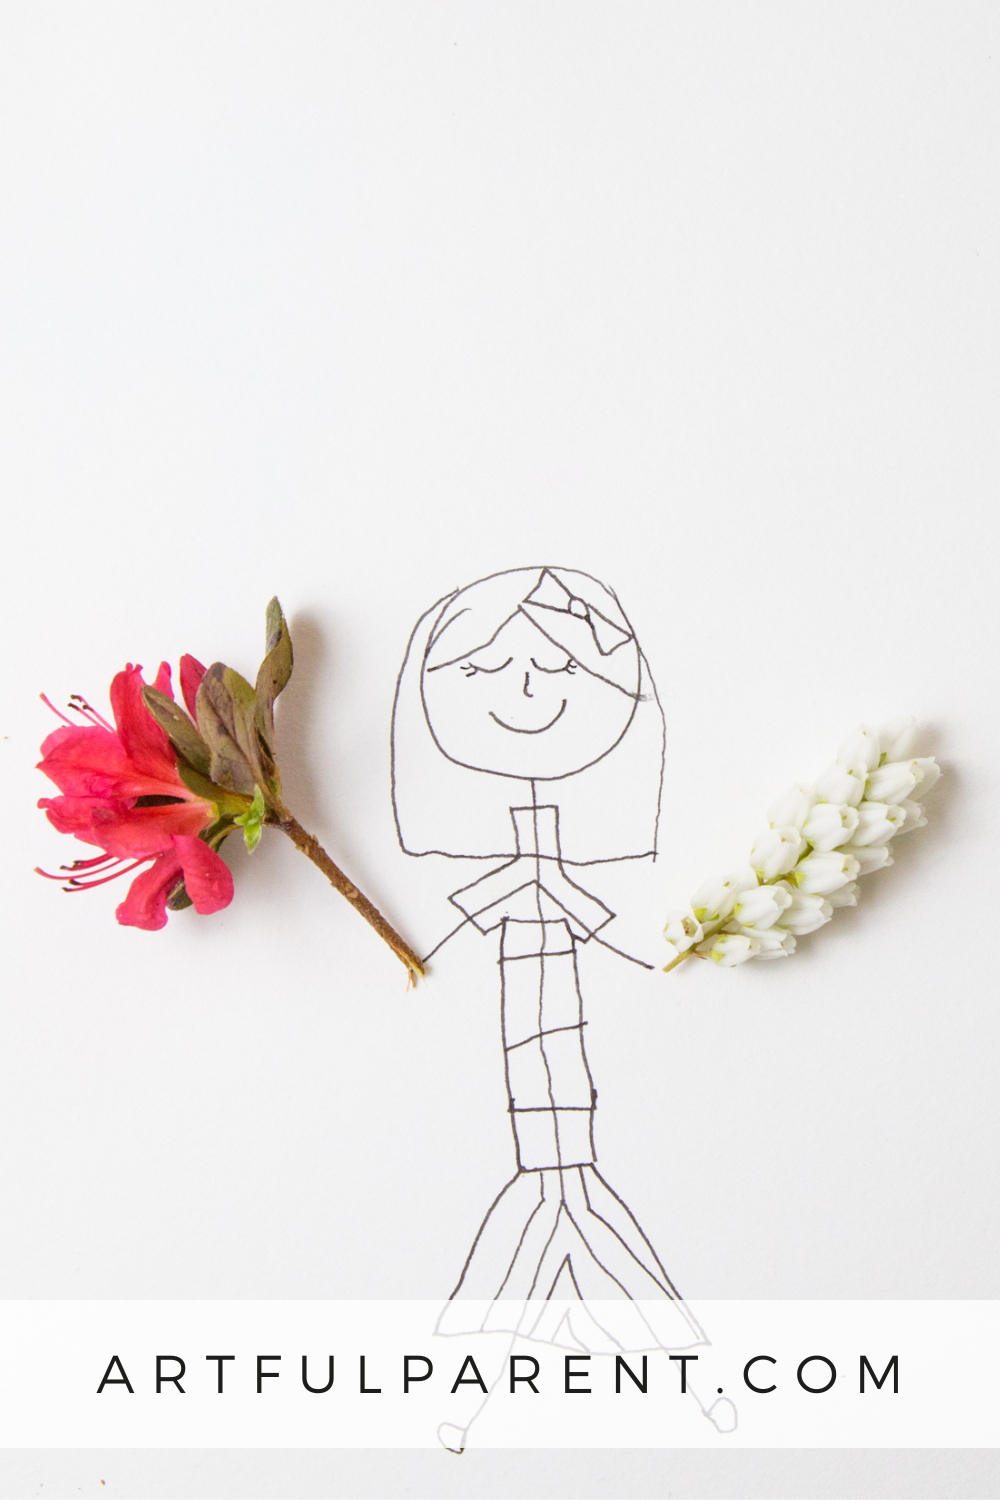 How to Make Pictures with Flowers